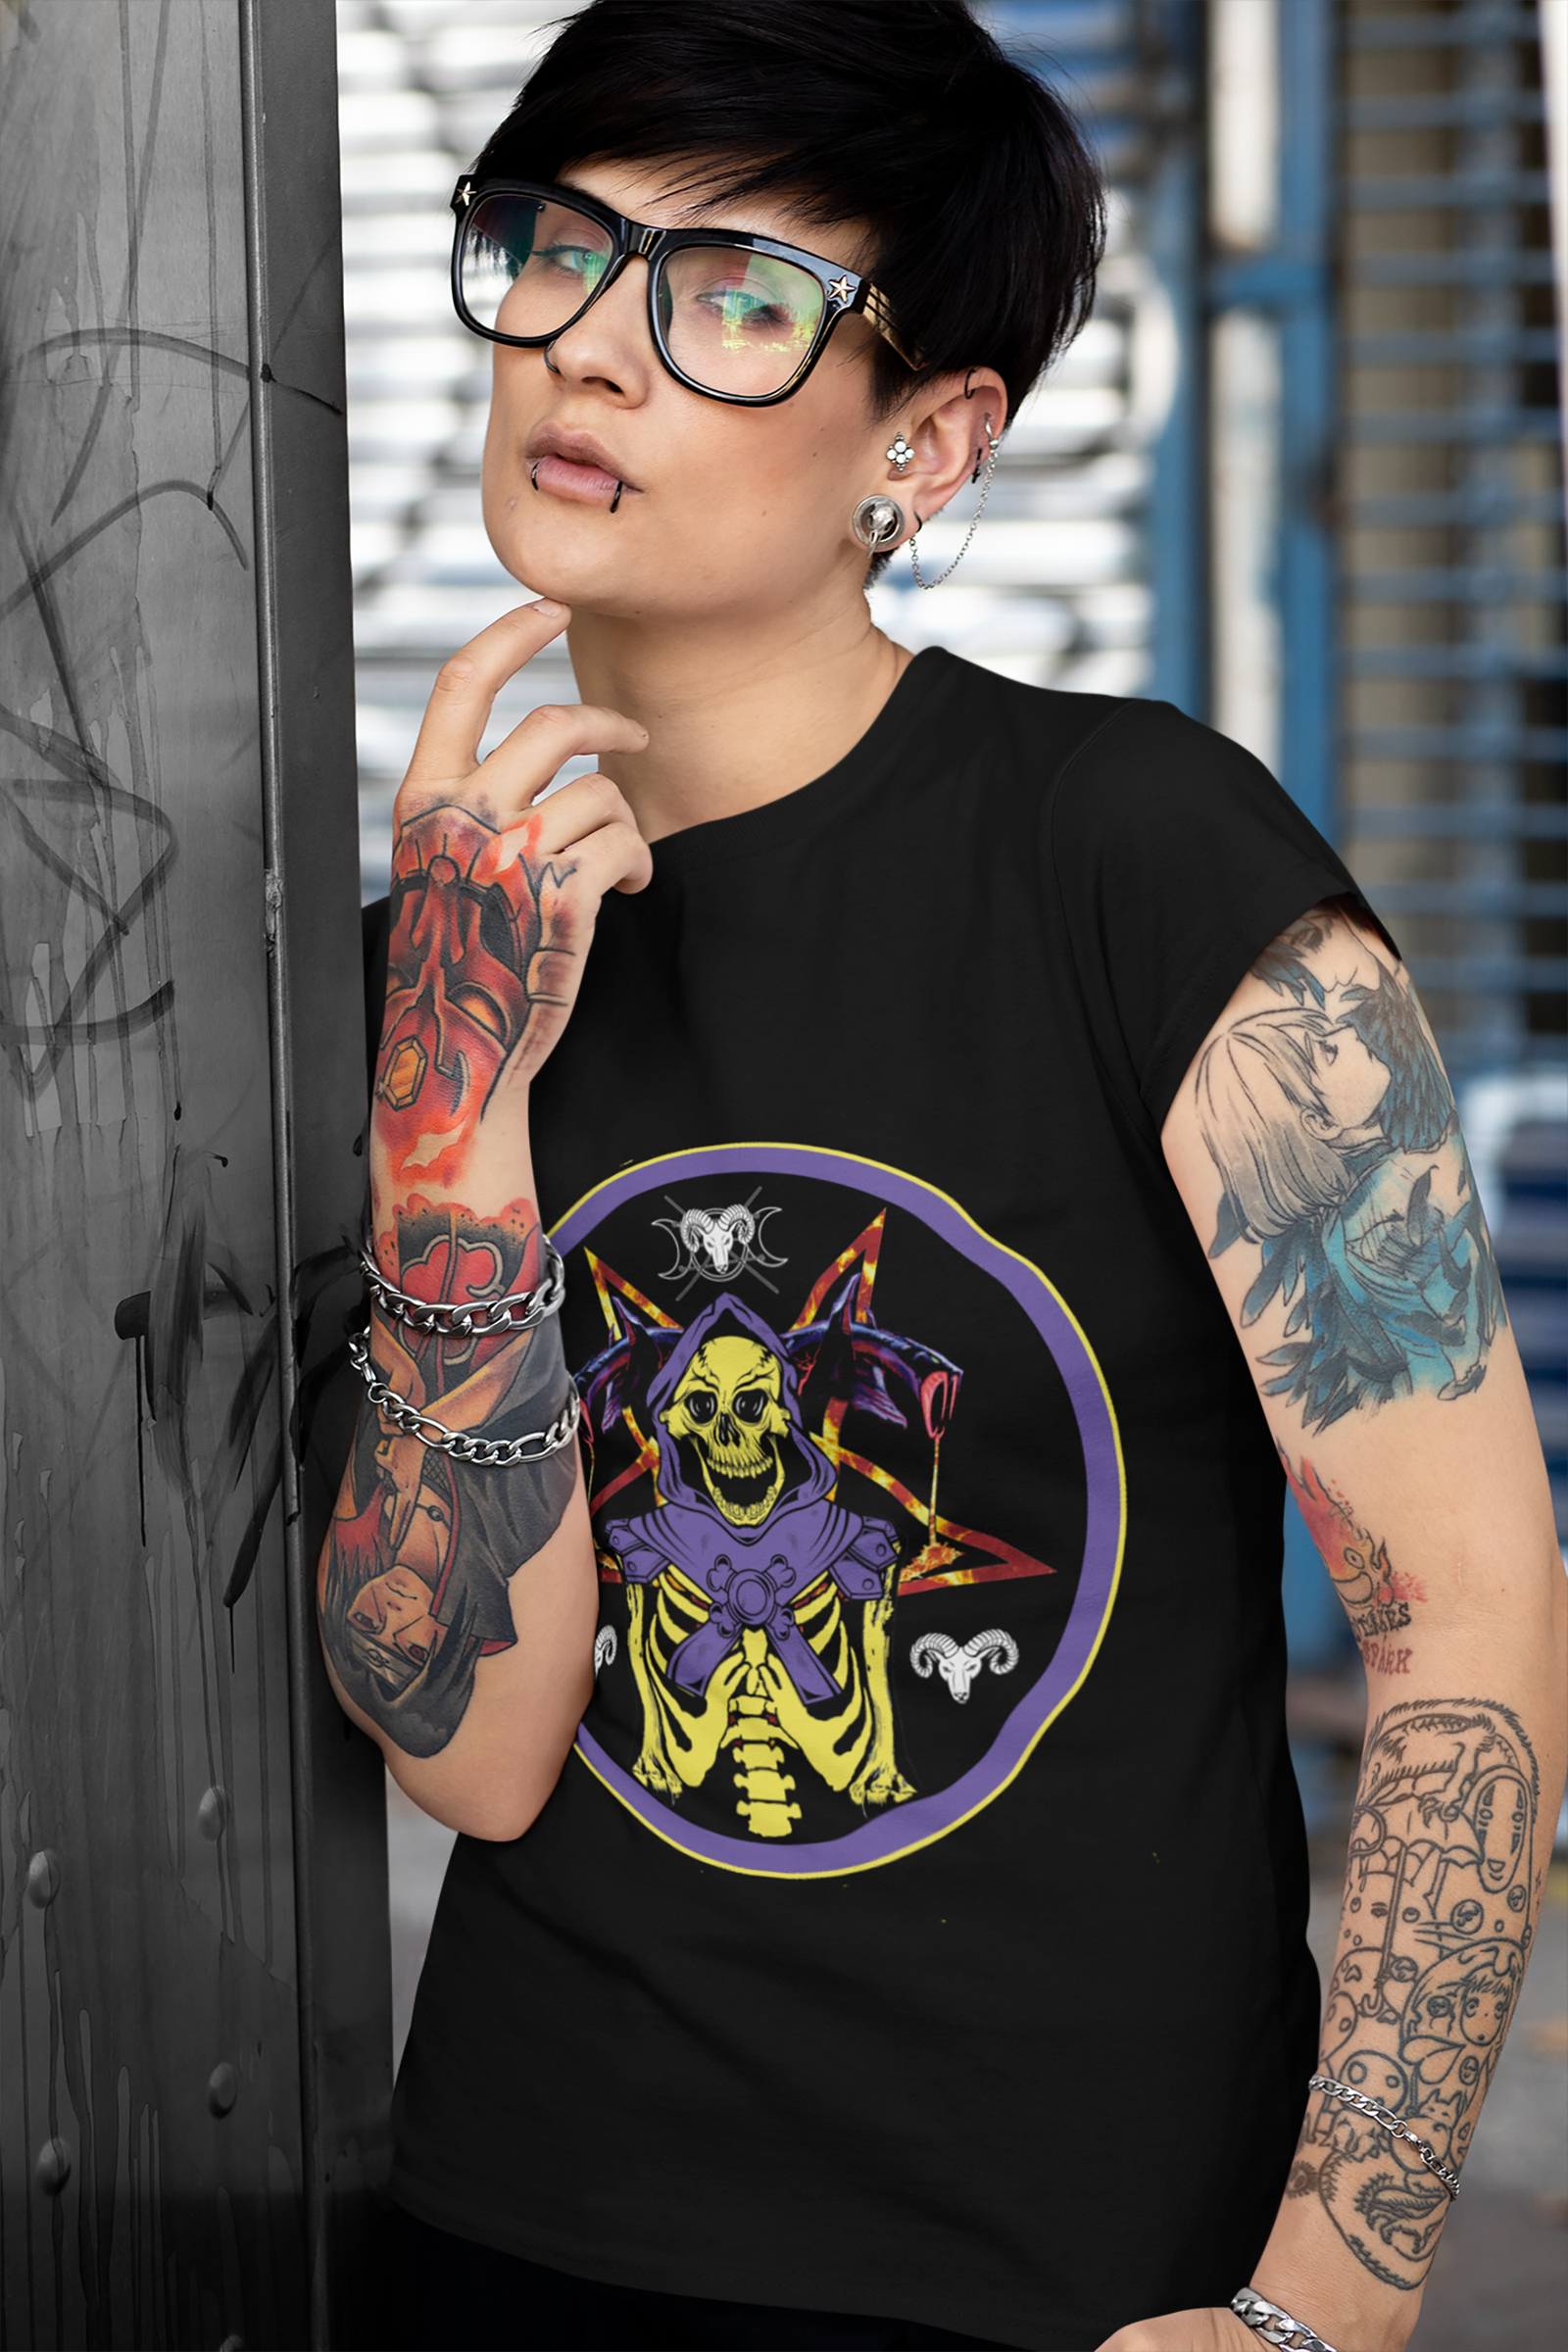 t-shirt-mockup-featuring-an-androgynous-person-with-tattooed-arms-32931